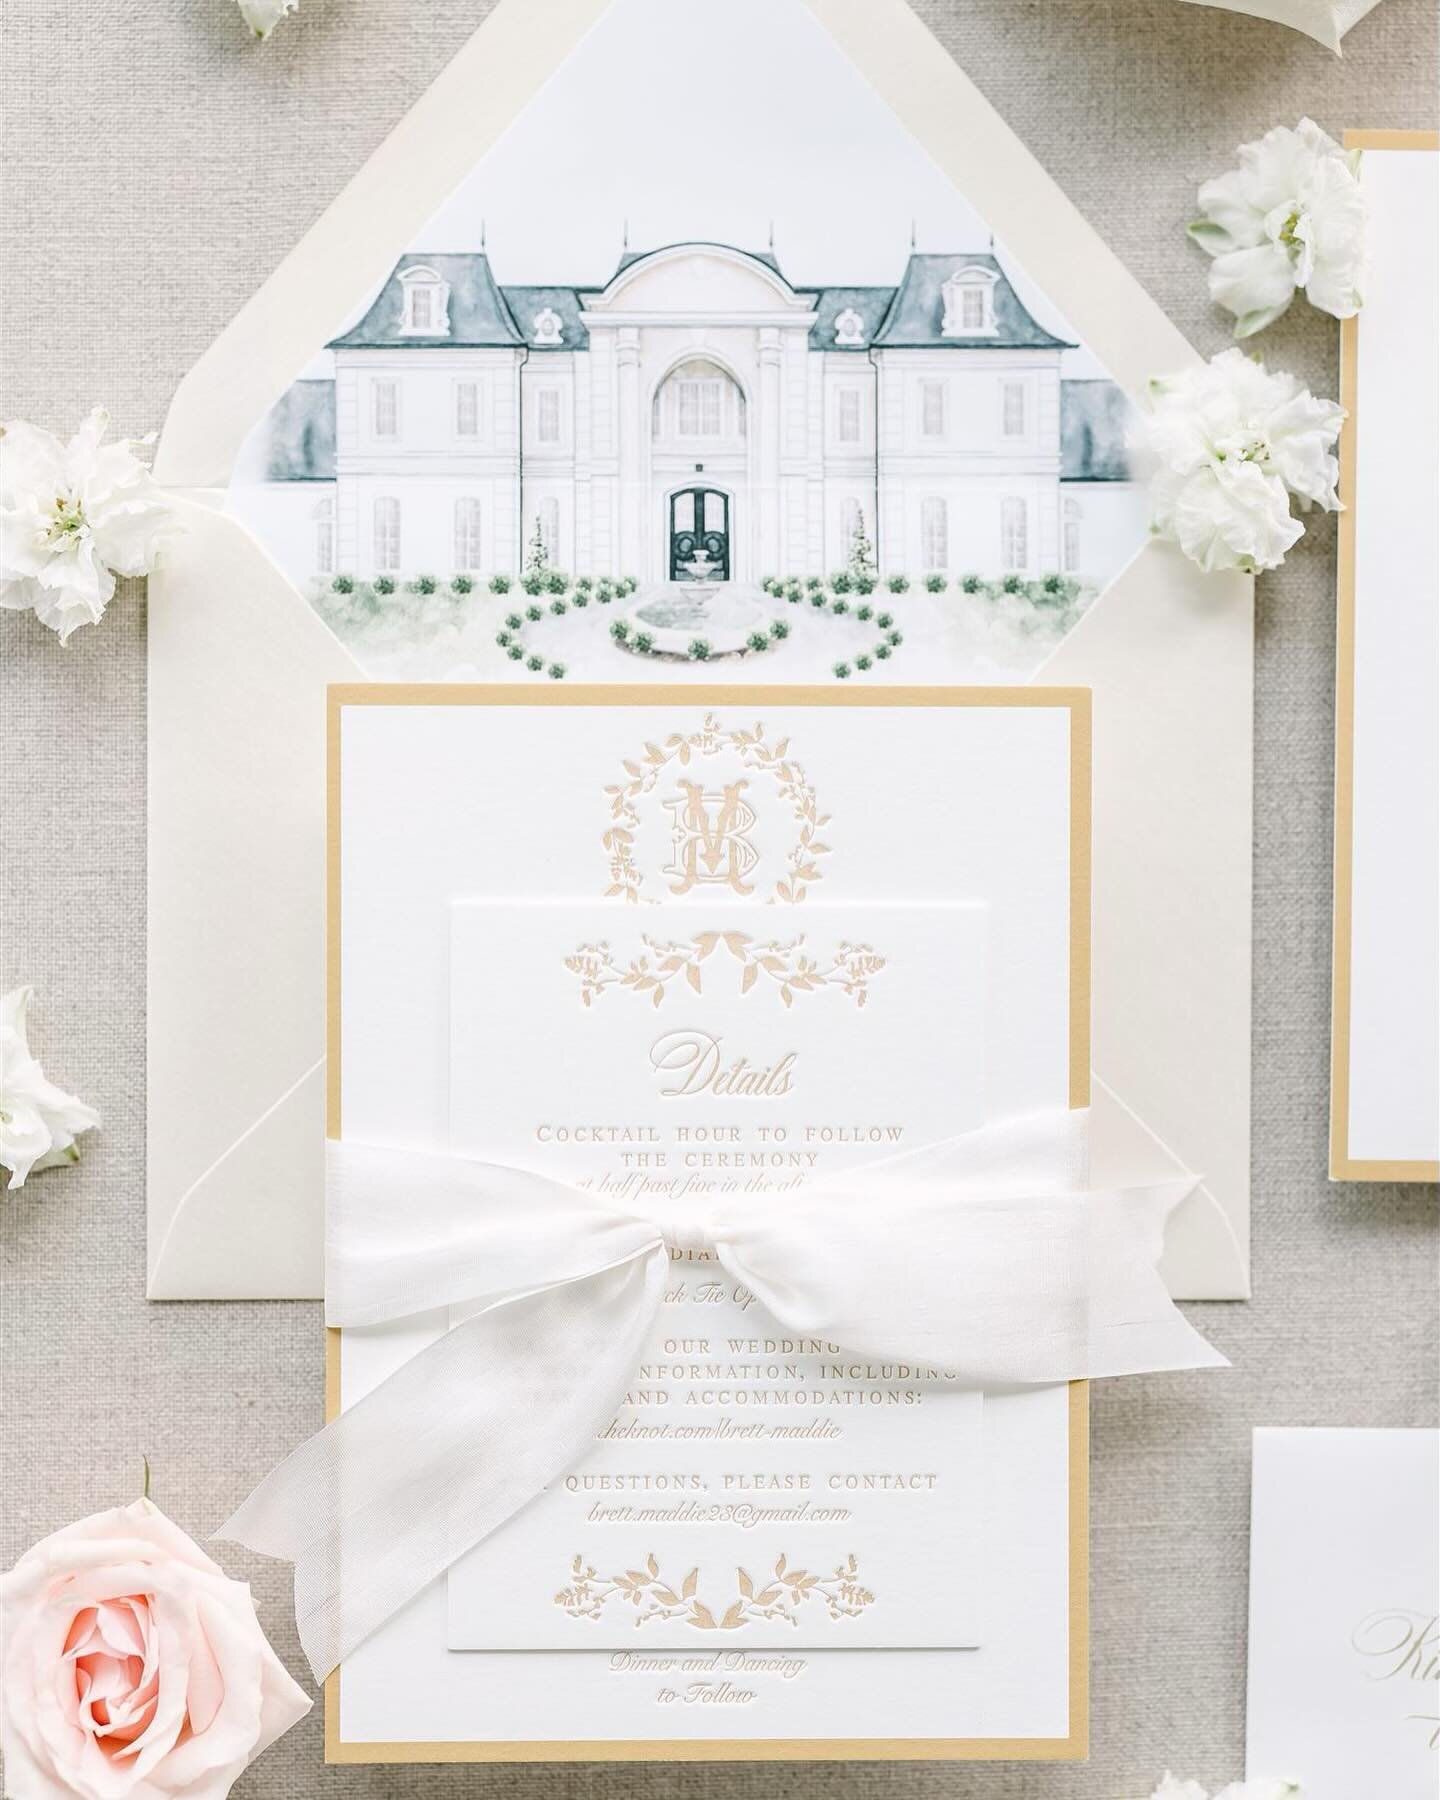 Designing this suite from start to finish was so delightful with @maddiegracebrinner! Her @thehillsideestatetx venue painting was so fun to play with - Maddie featured it on her envelope liners, cocktail napkins and even table number signs. Loved lov